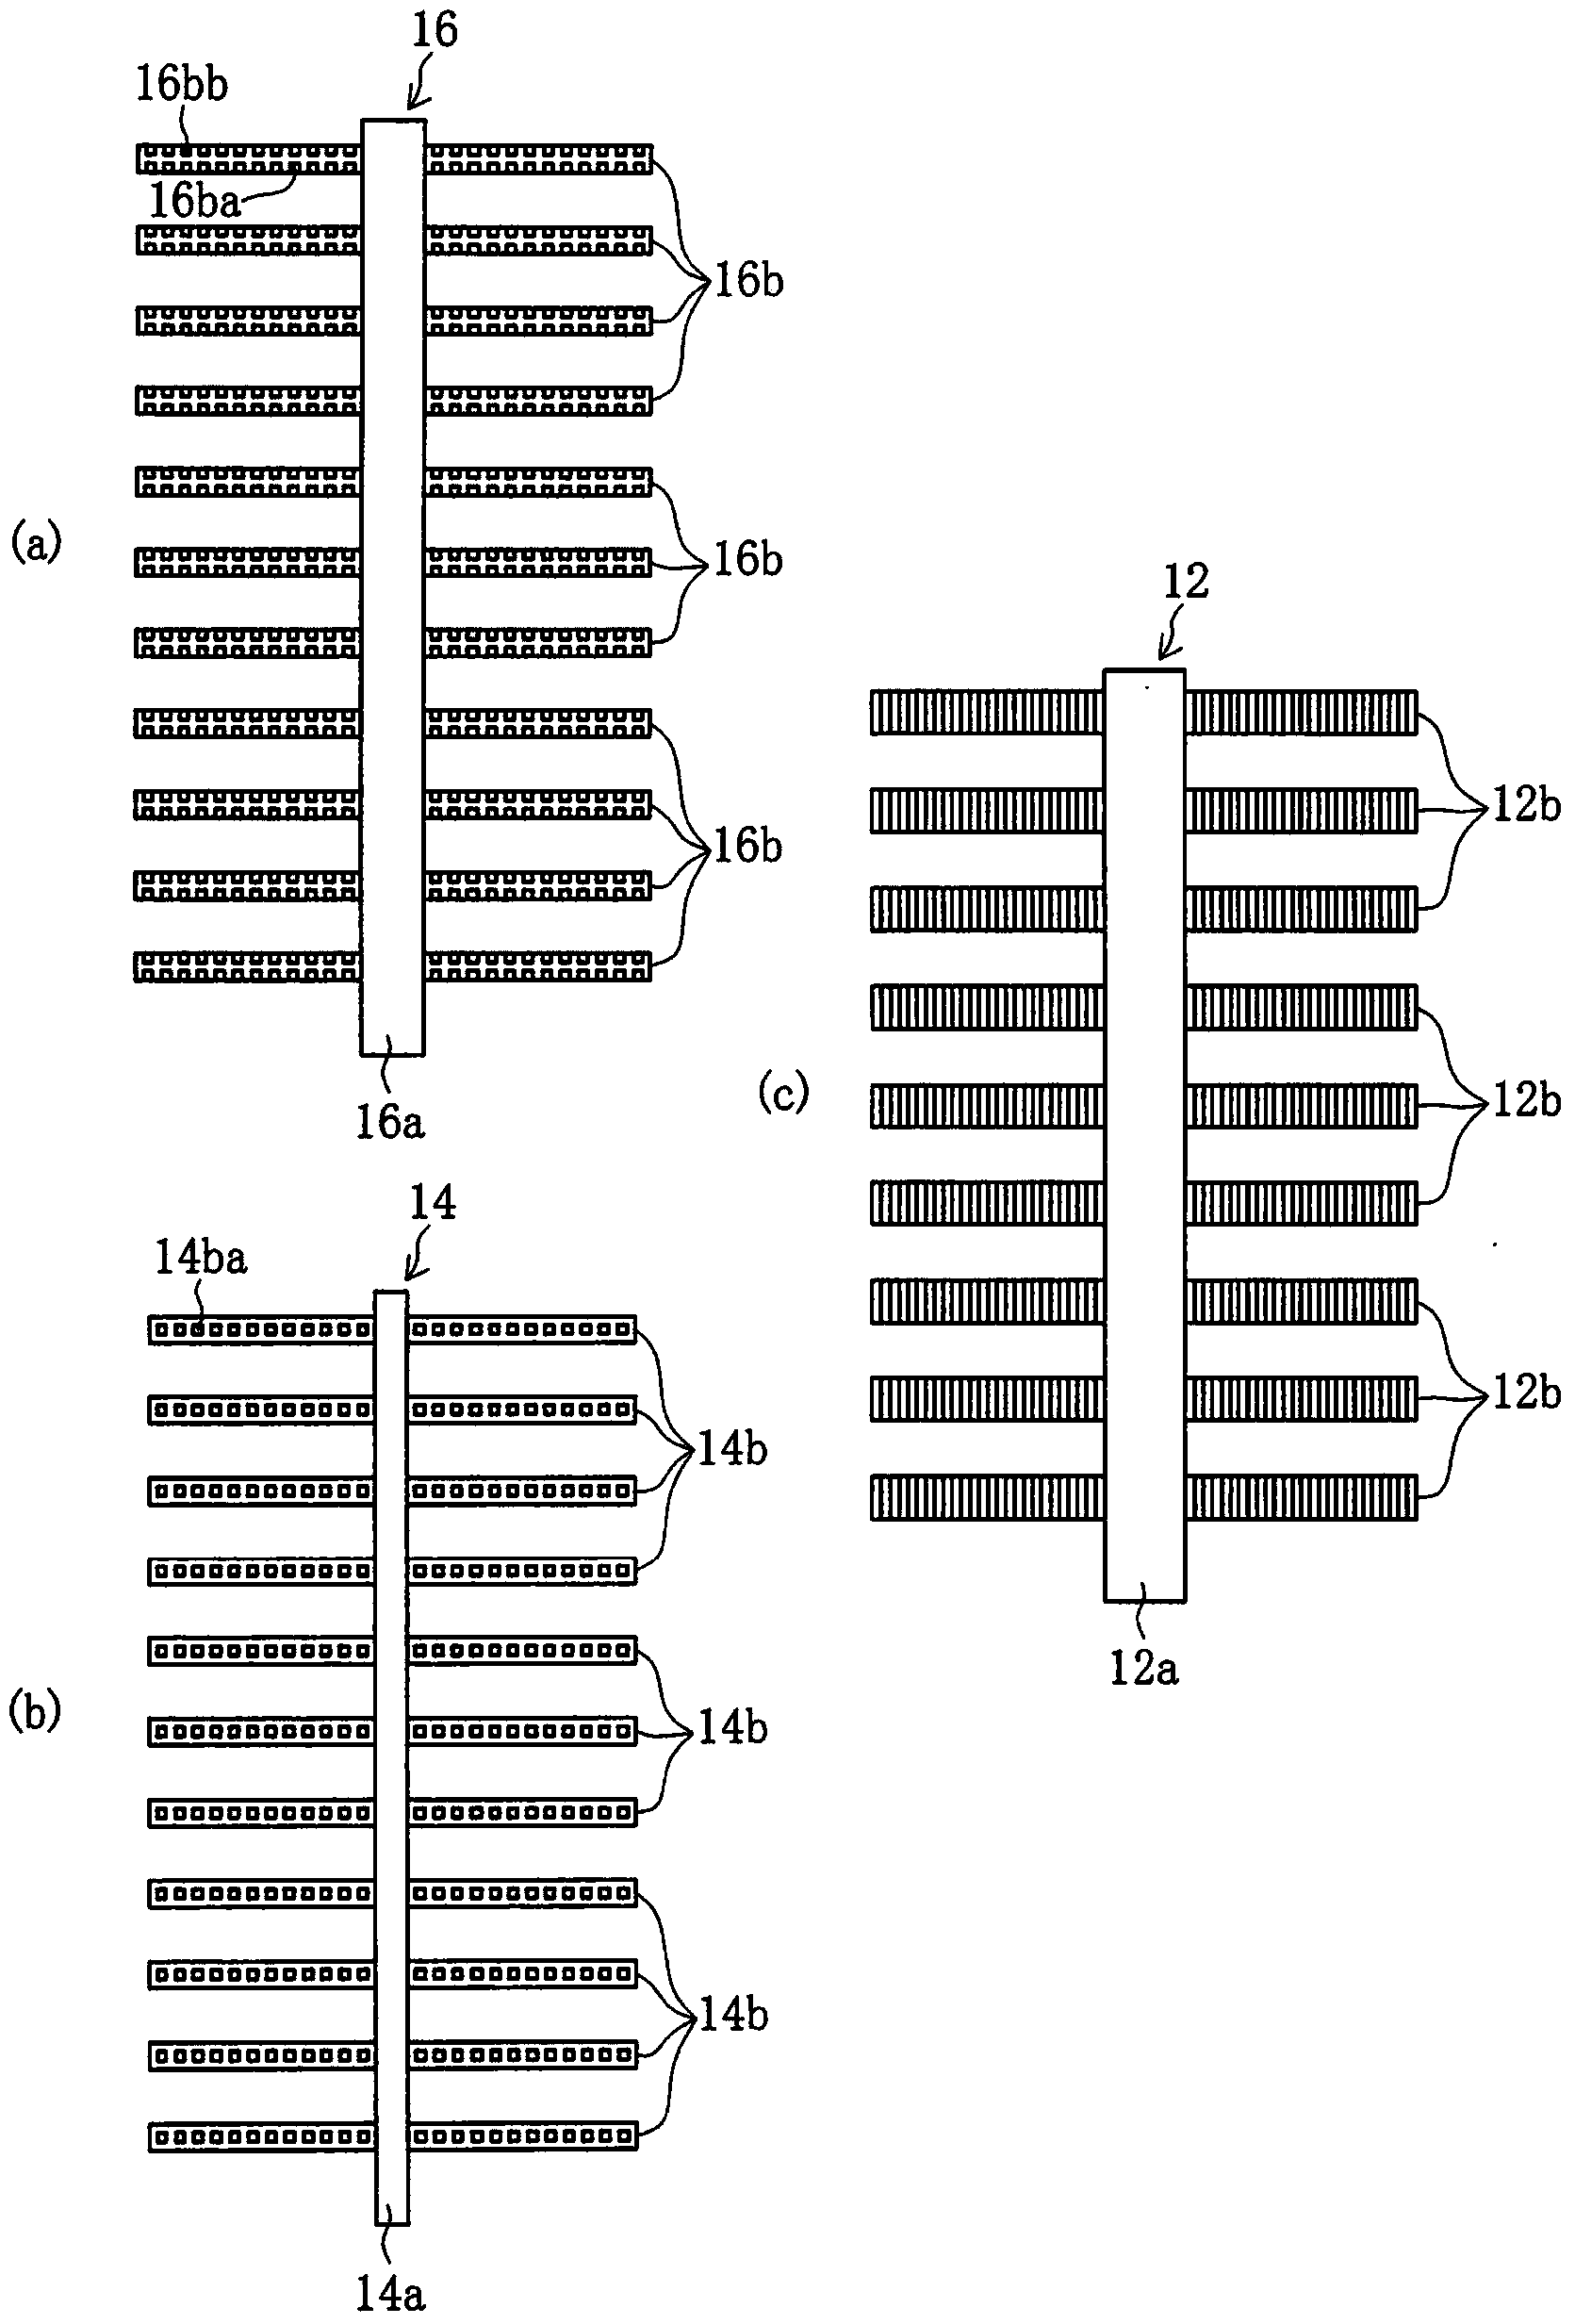 Osmosis filtering method for sea water and osmosis water intake unit